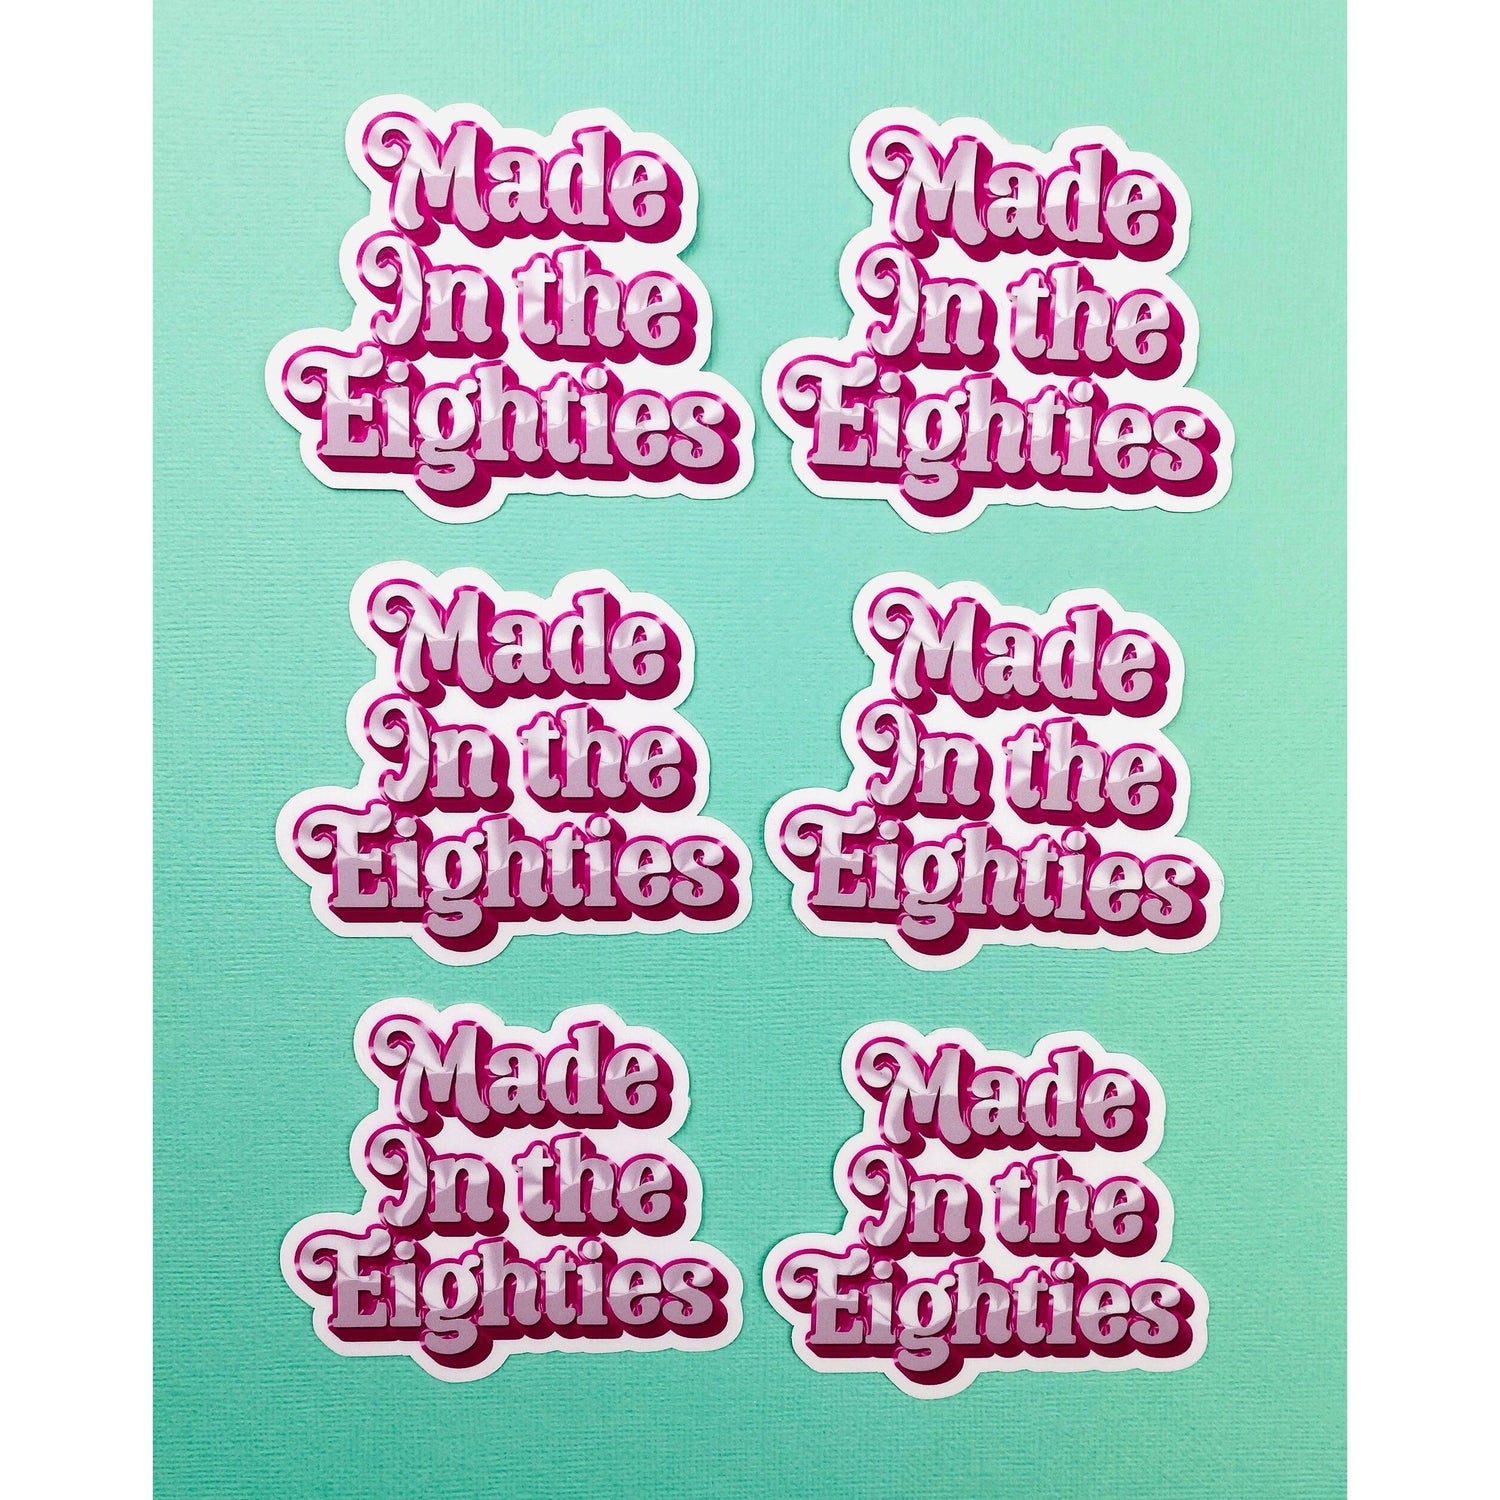 Made In The Eighties Sticker Vintage Design from 1980s, Eighties Stickers, Pink Stickers, Hot Pink Sticker Girly Stickers, Pretty Stickers - Ottos Grotto :: Stickers For Your Stuff